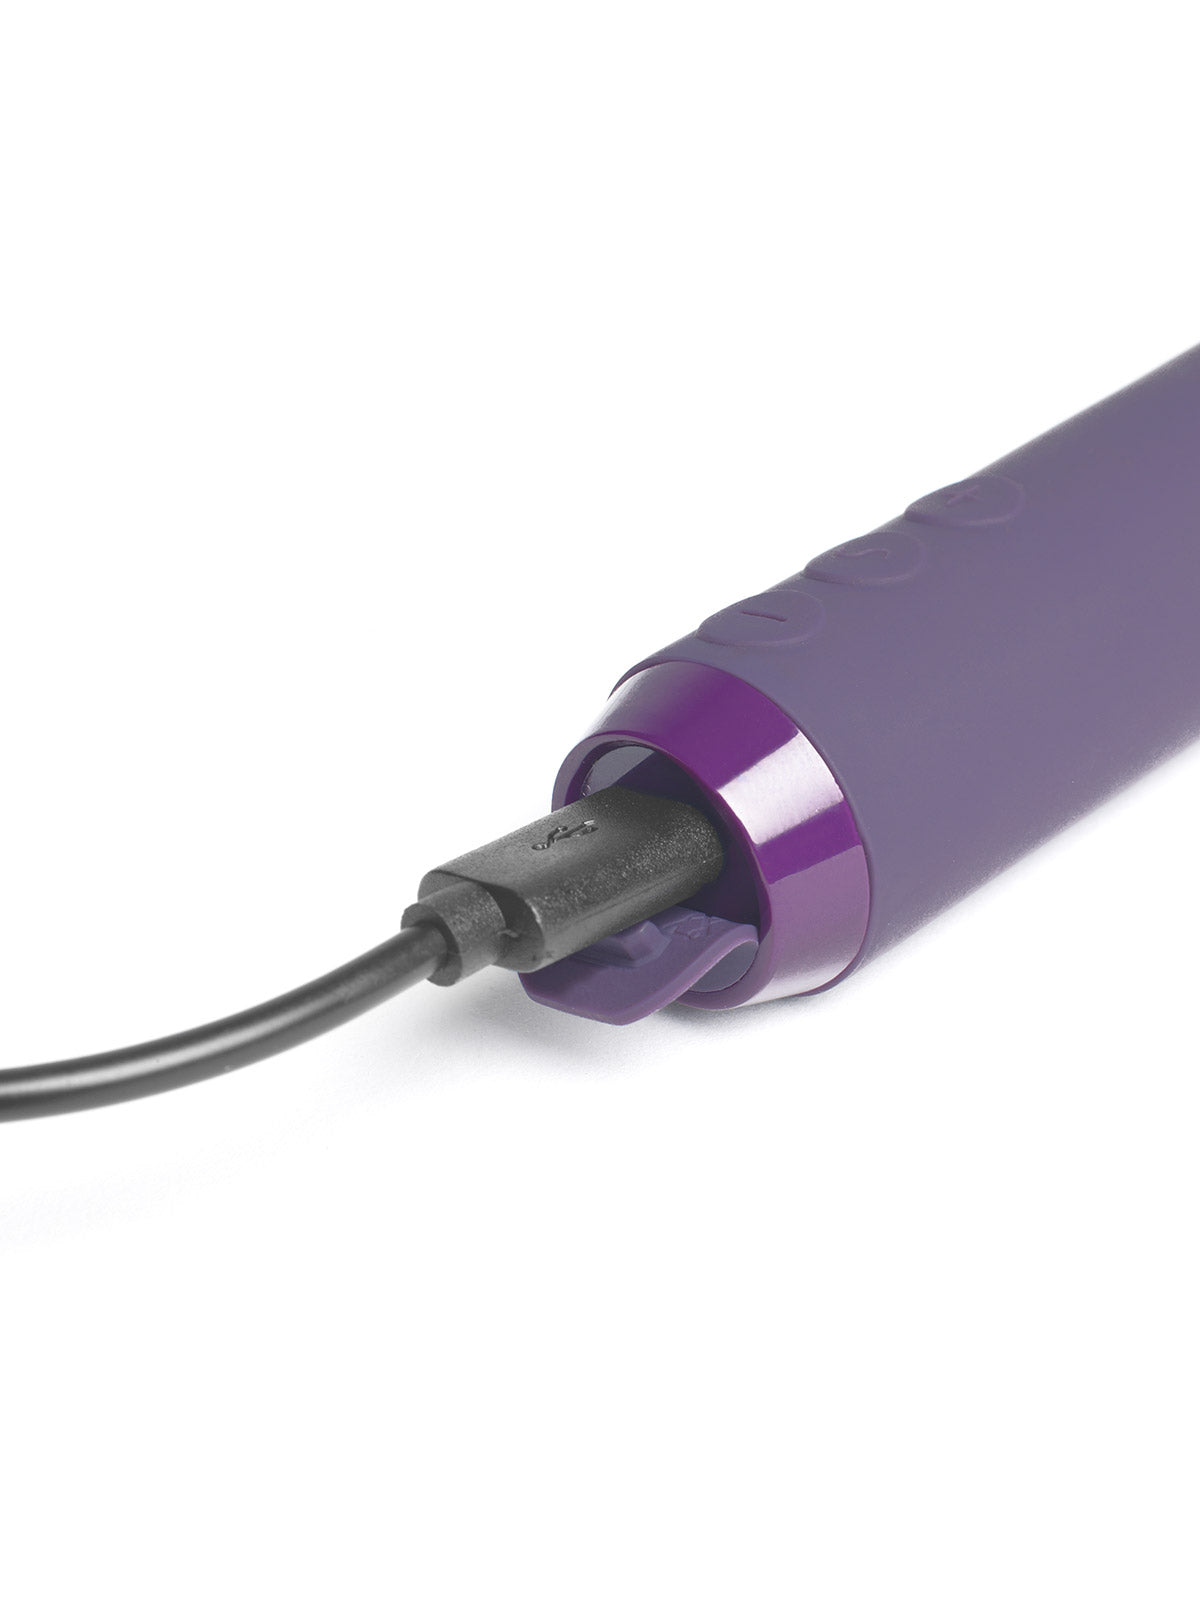 Mini G-Spot Bullet Vibrator by JeJoue Charger